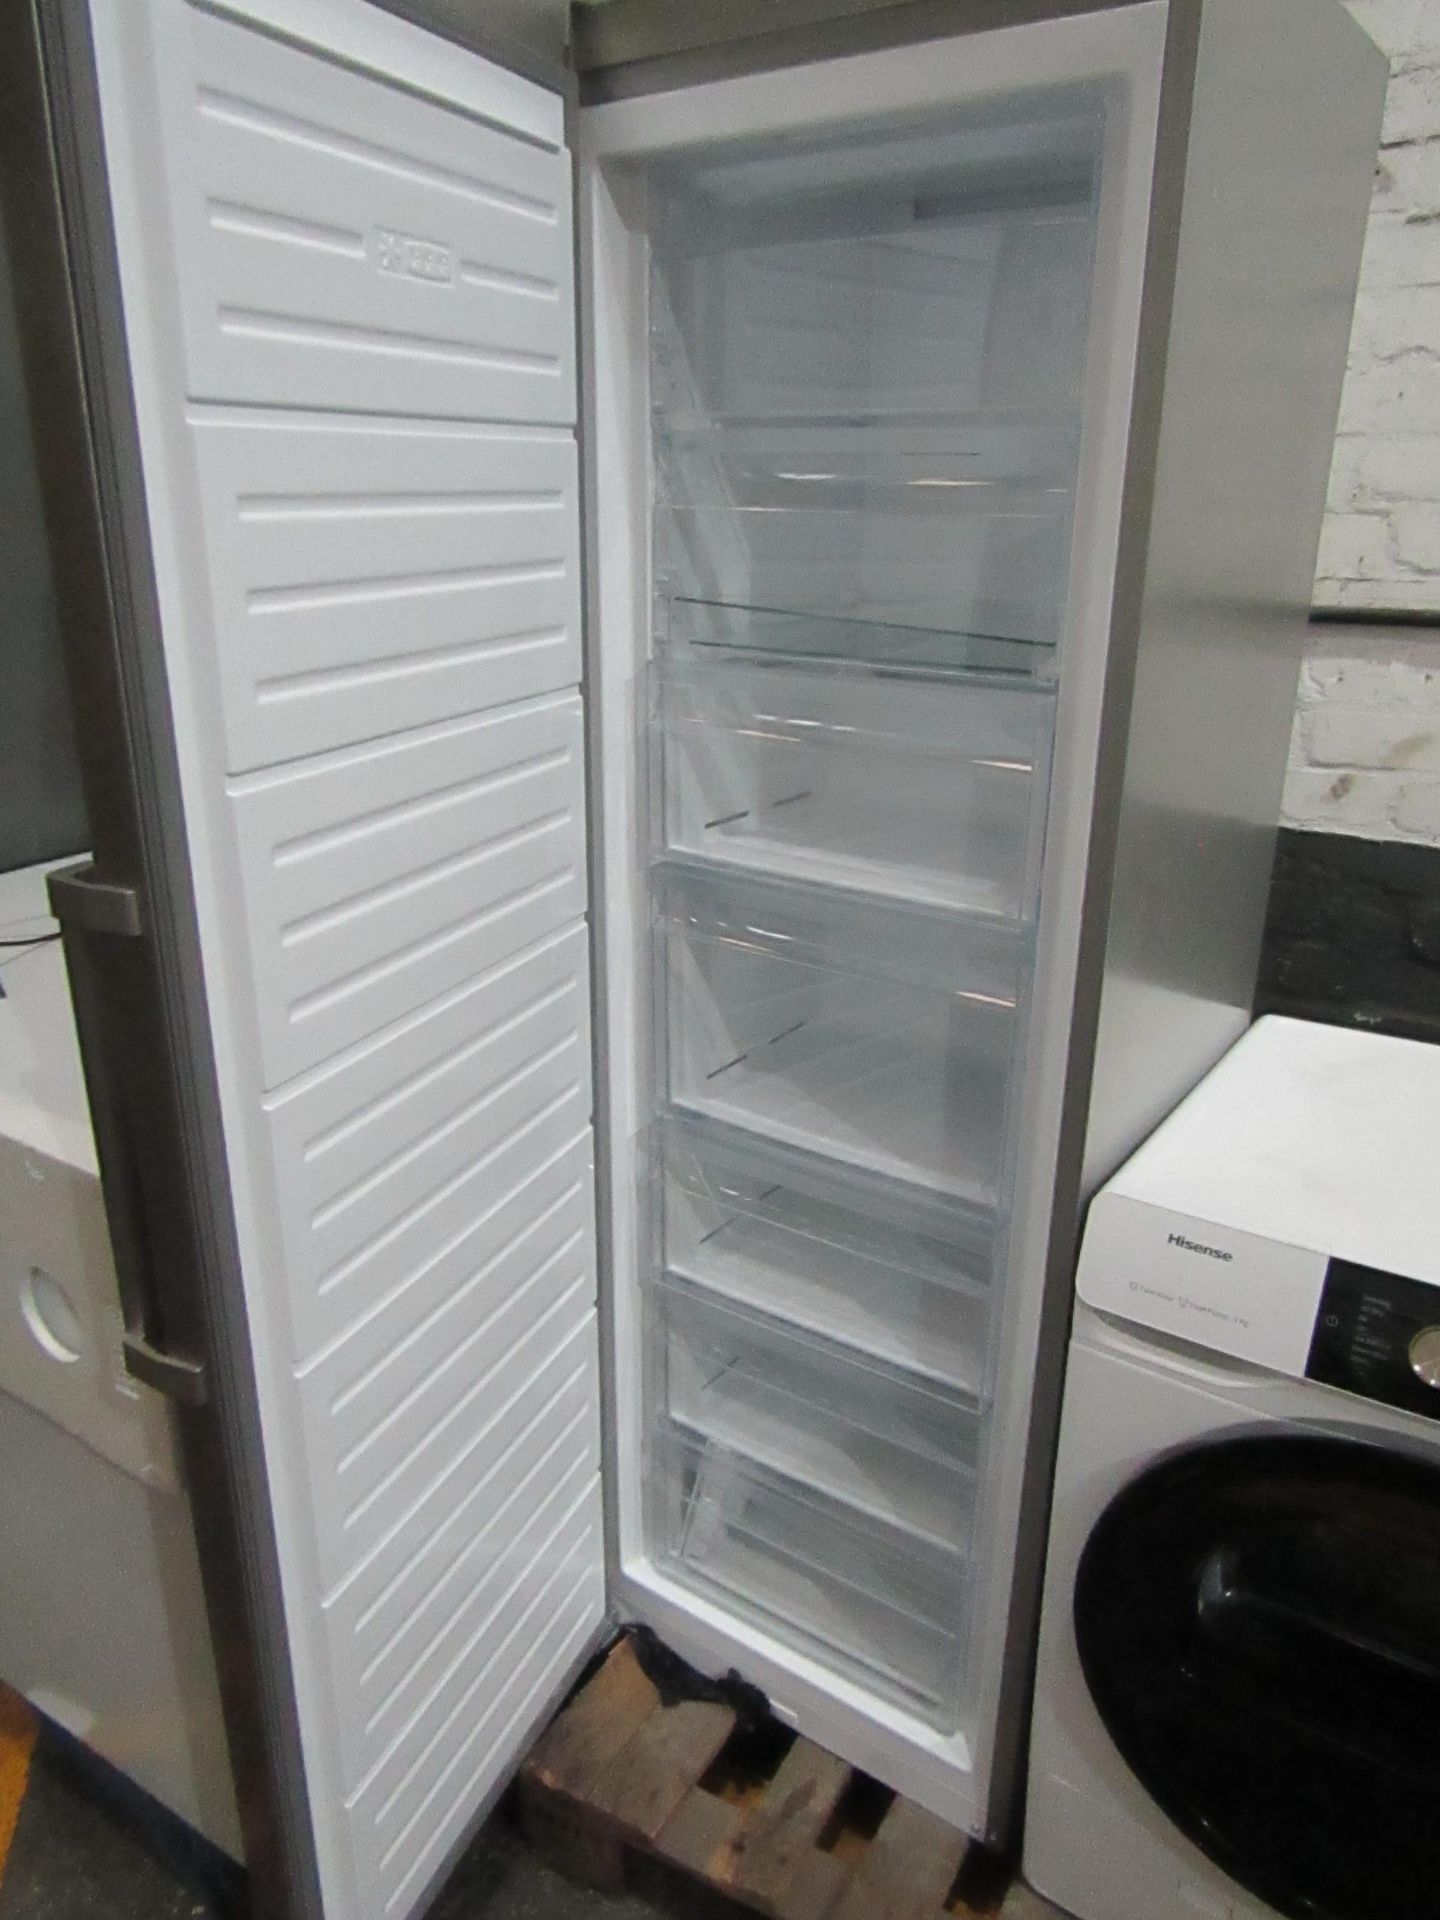 Smeg tall freezer, powers on but doesn't get cold - Image 2 of 2